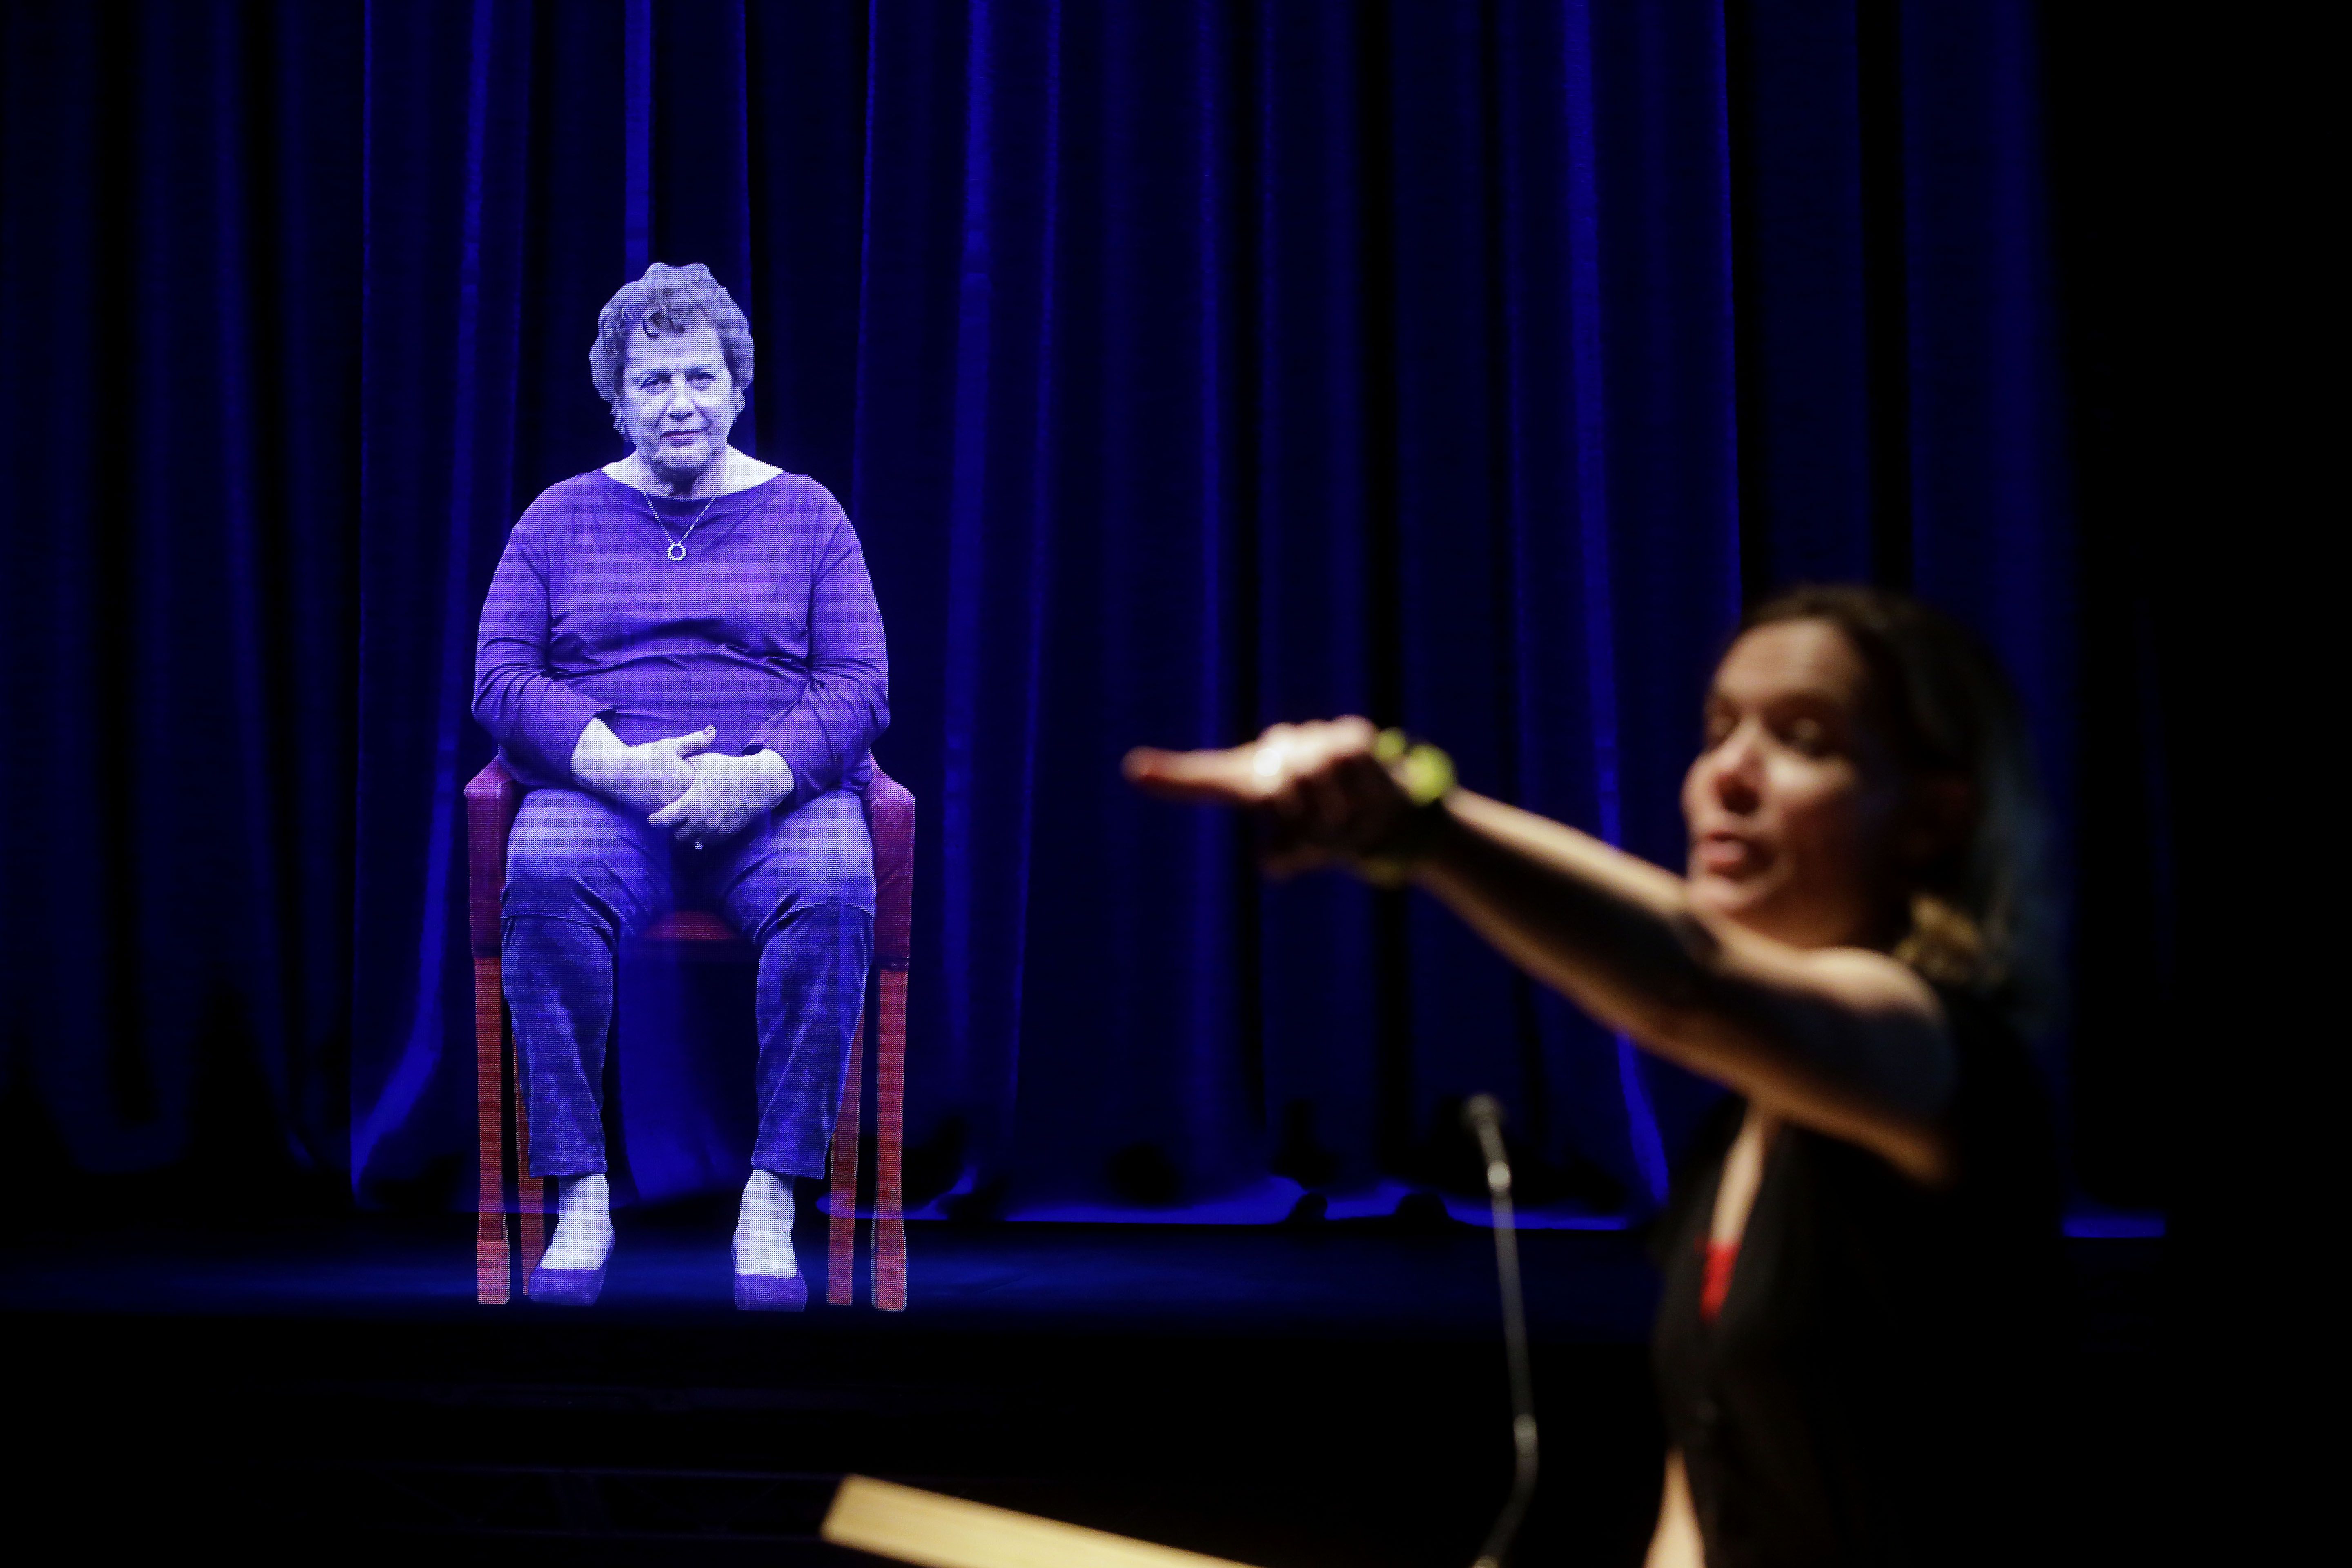 A holographic image of a Holocaust survivor is displayed on a stage.